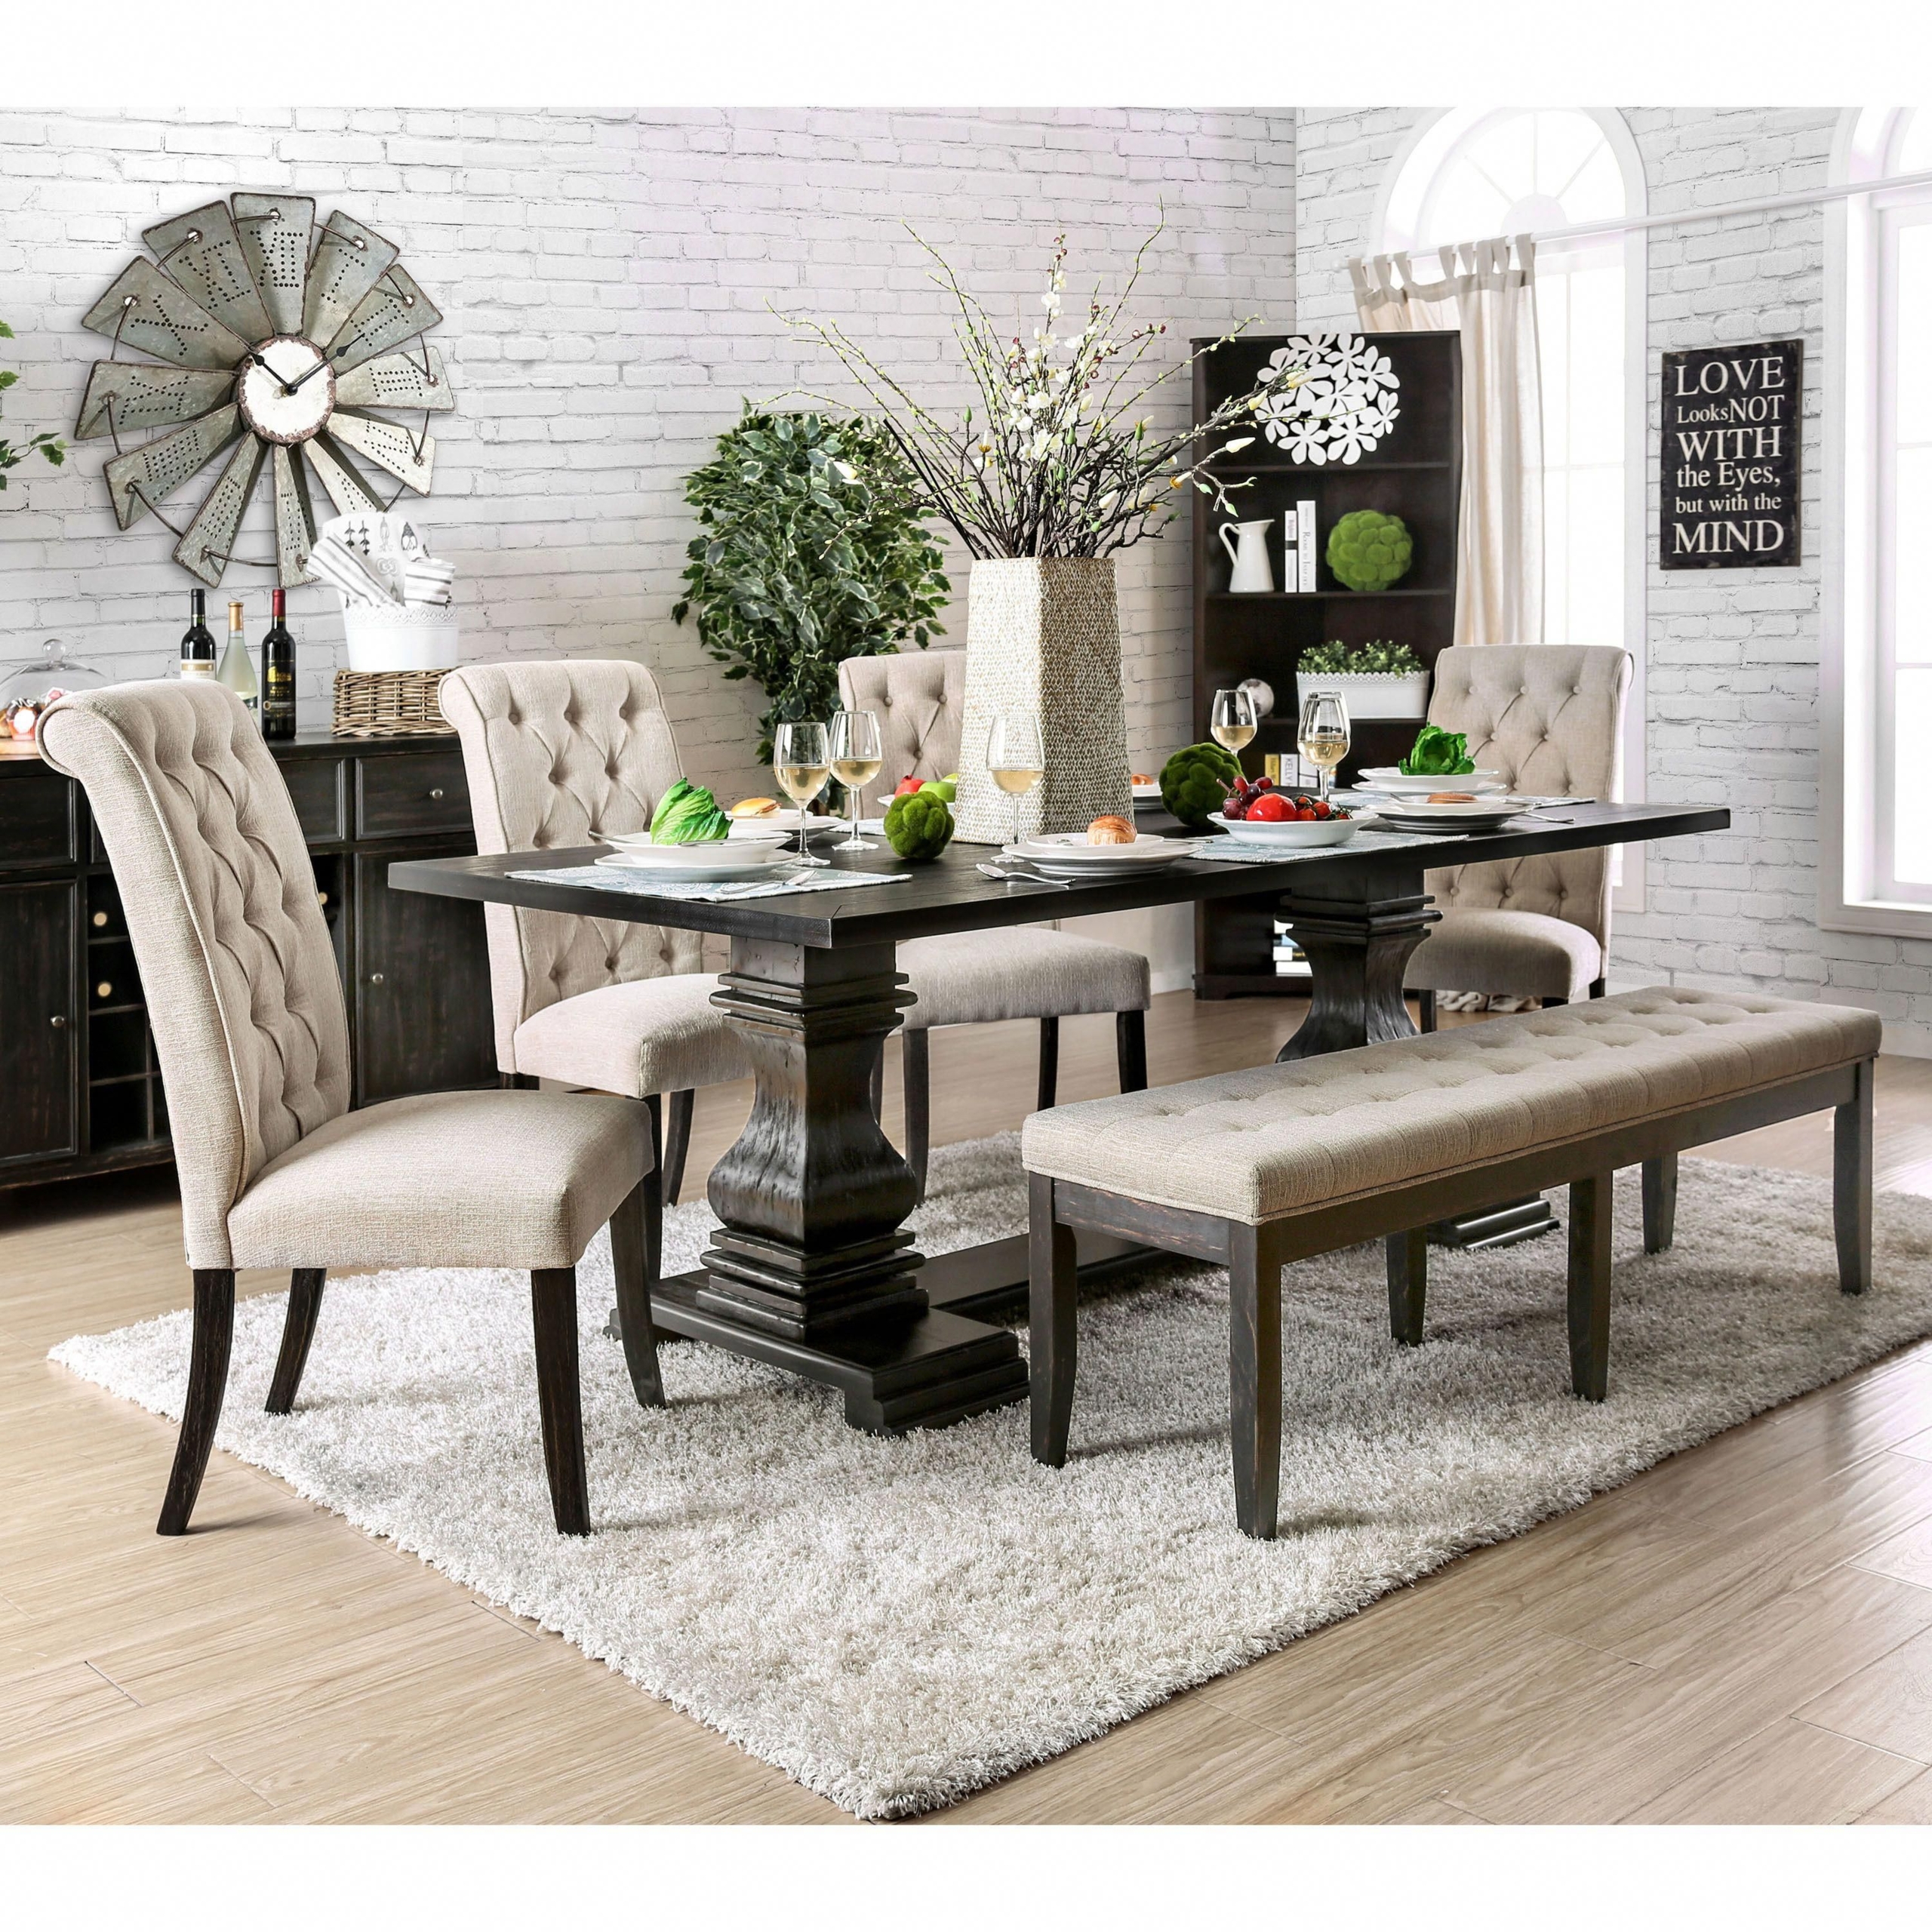 Elegant White Dining Table Off 69, Stylish Dining Room Tables